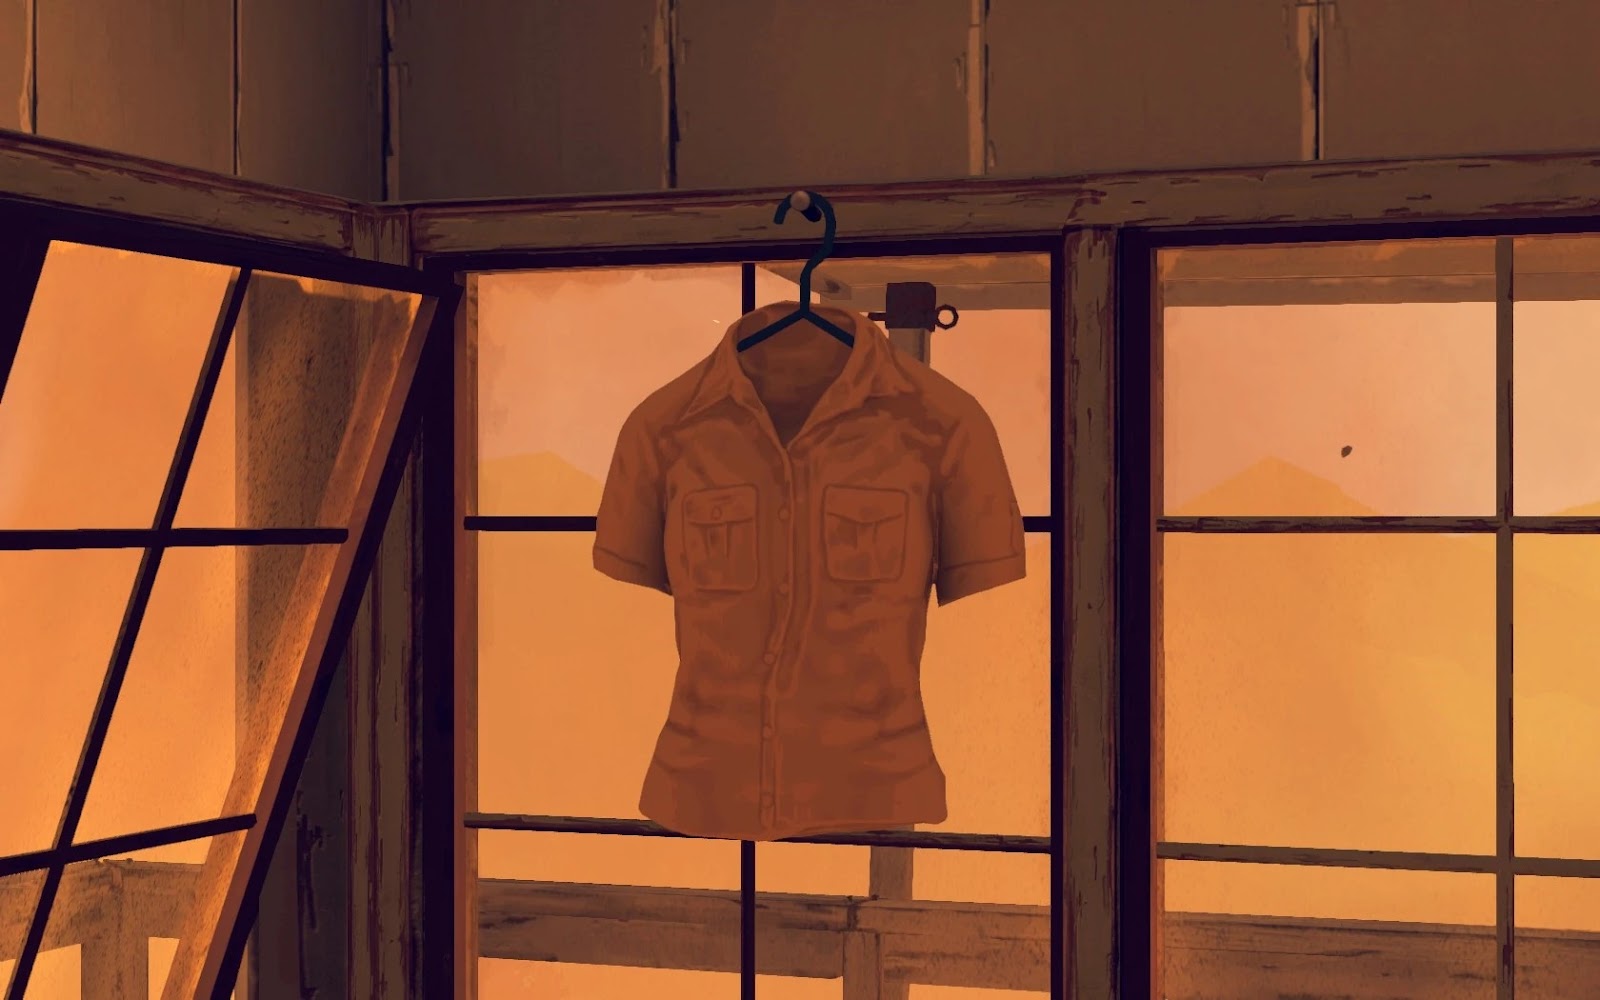 An image of Delilah's shirt from her watchtower in Firewatch. 